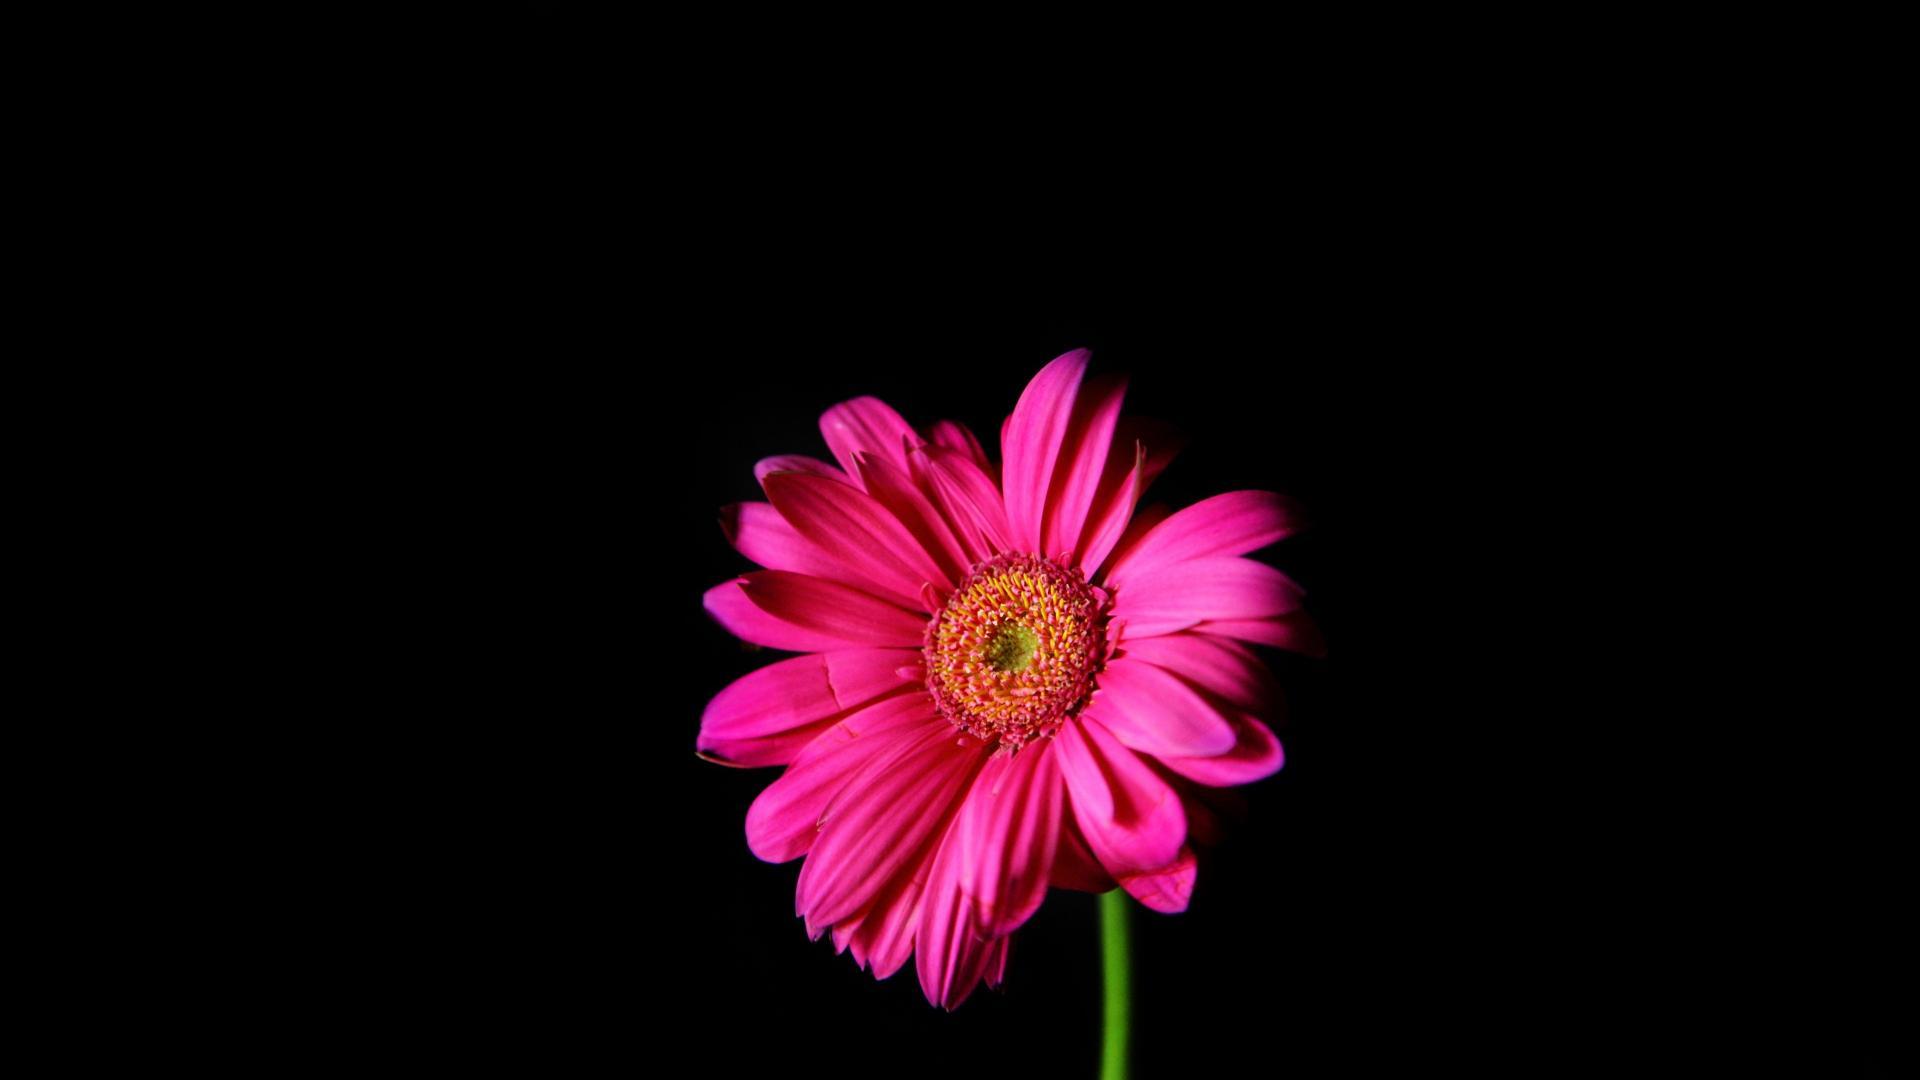 Pink And Black Flower Wallpapers